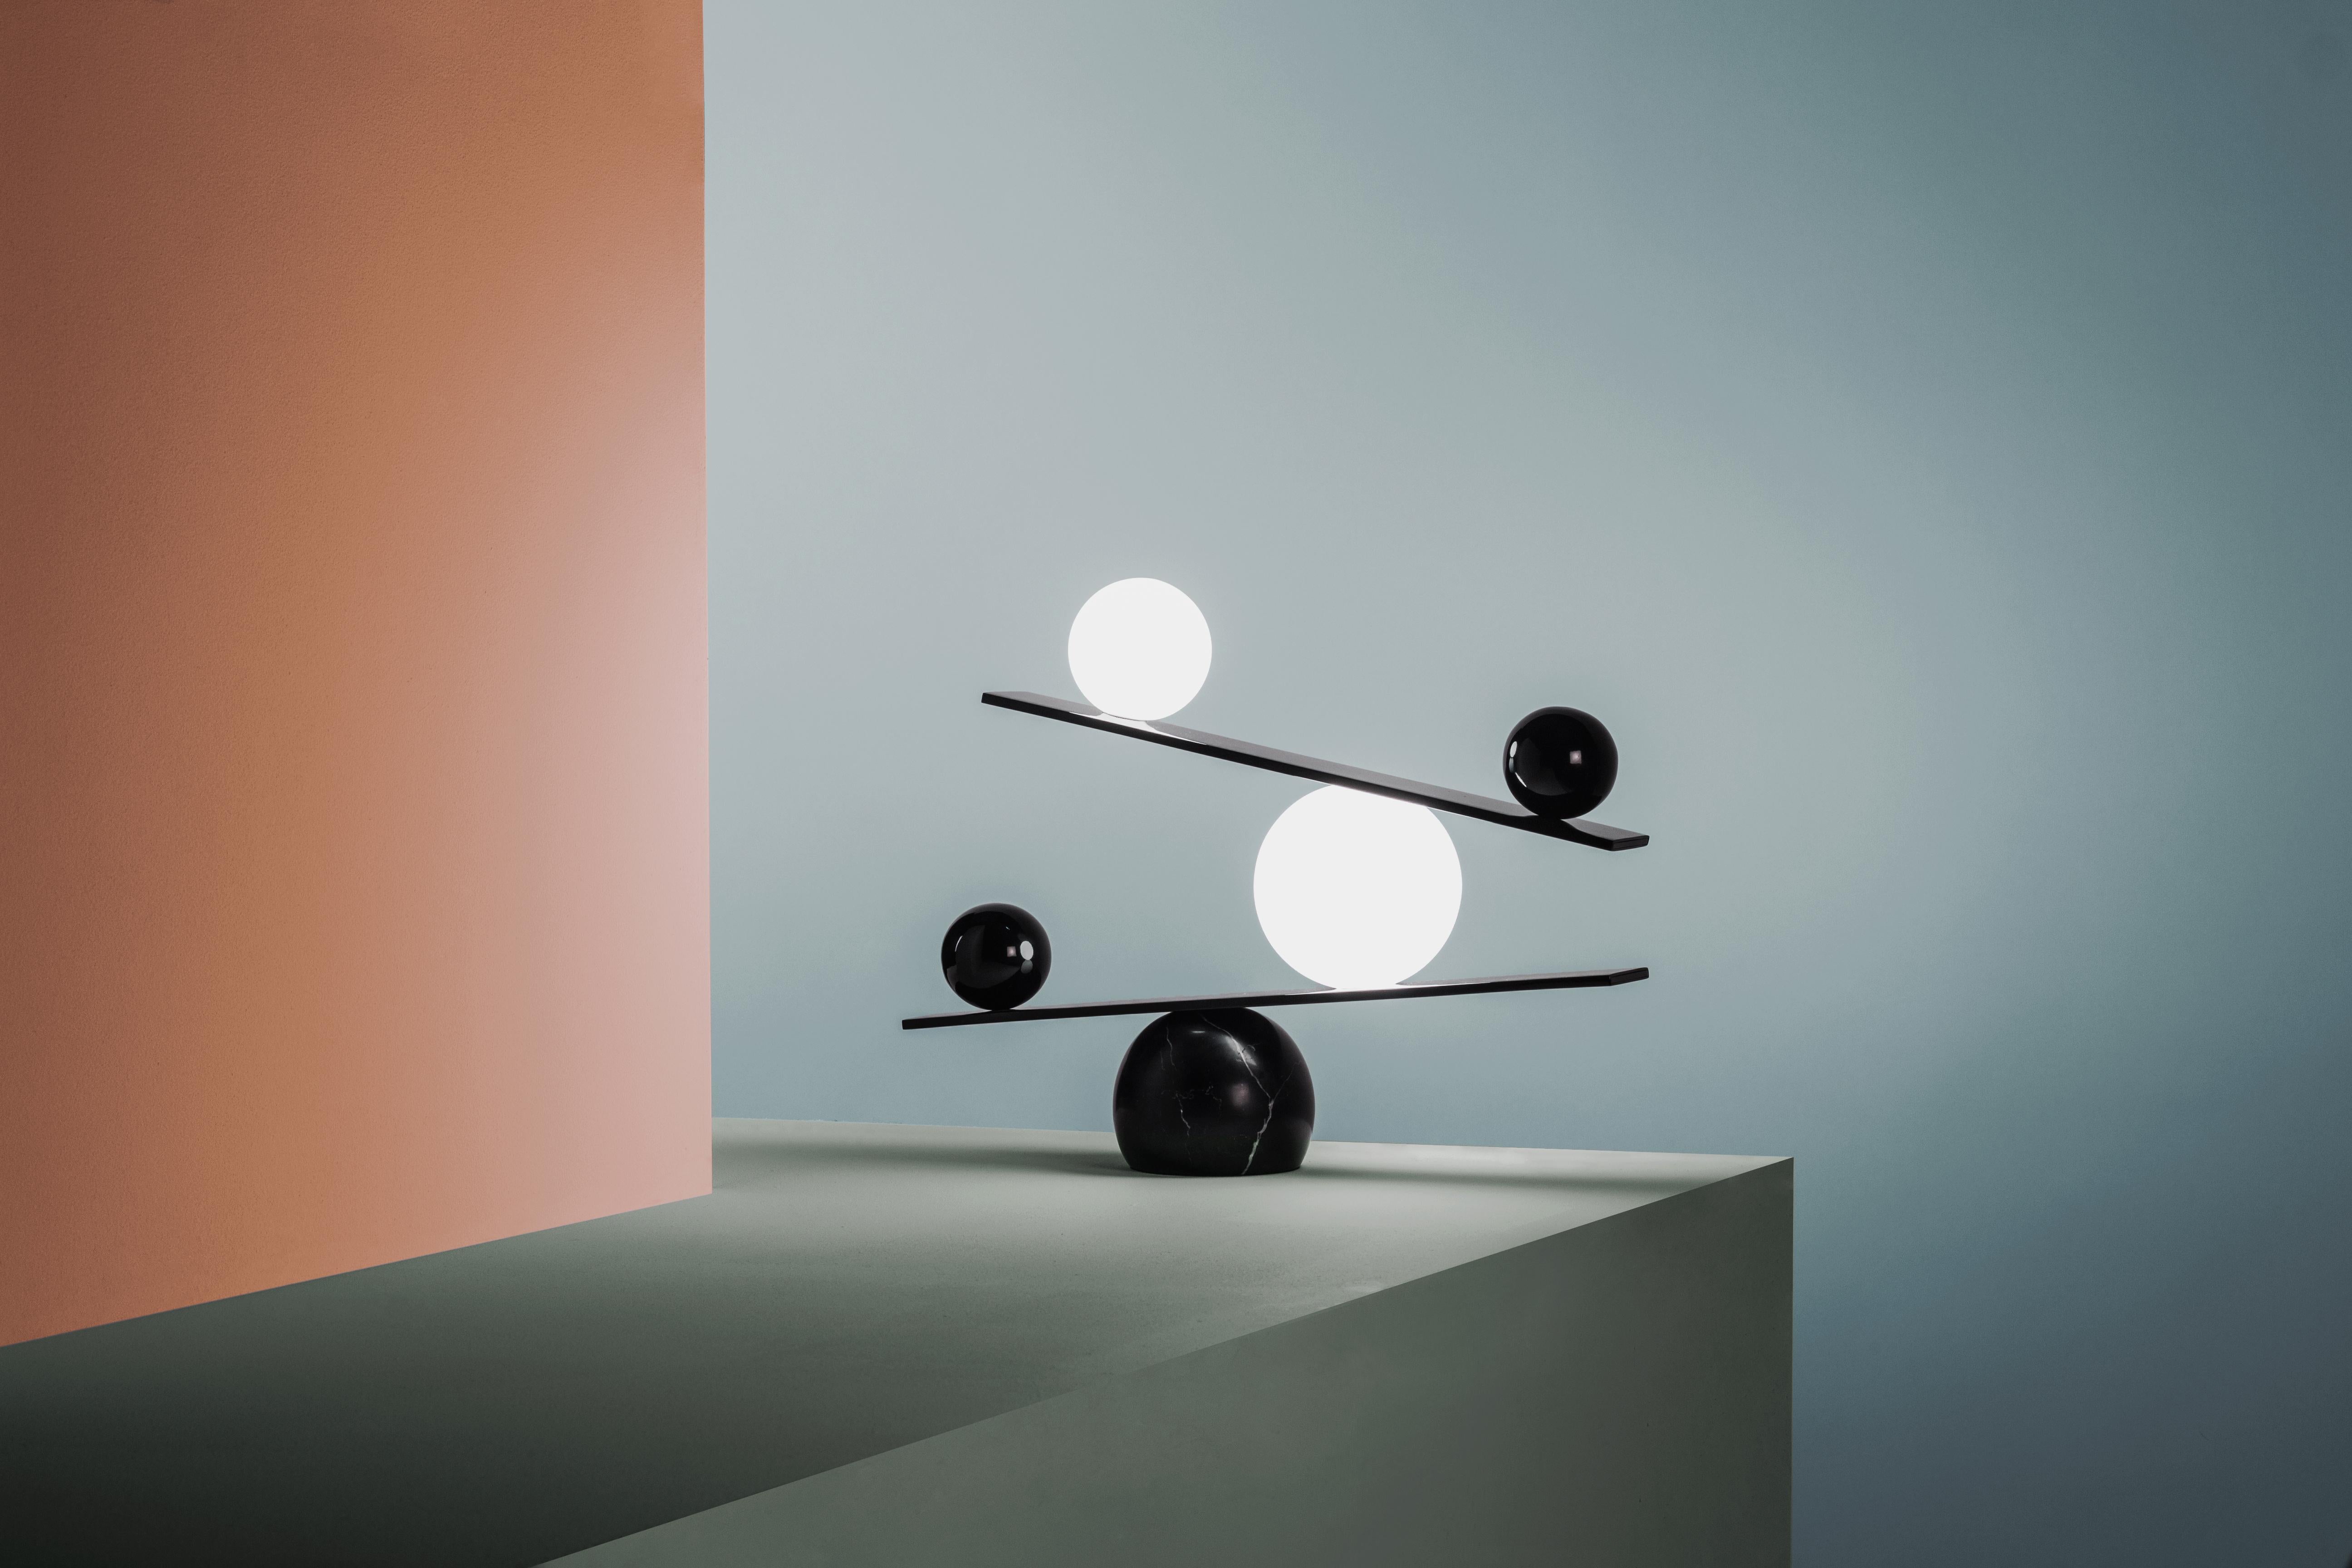 Balance table lamp by Victor Castanera.
Balance is a playful and curiosity evoking tribute to the concepts of gravity and time.
Dimensions: 40 (H) x 53.5 (L) x 13 cm
Materials: Glossy paint with marble base (also available in plated brass with